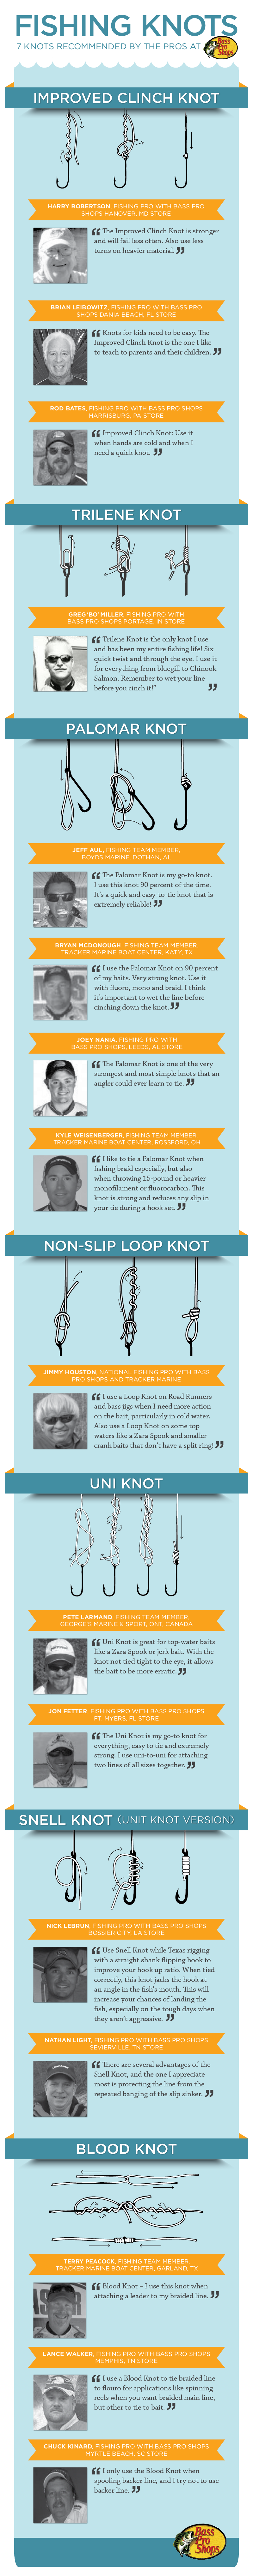 Fishing knot guide